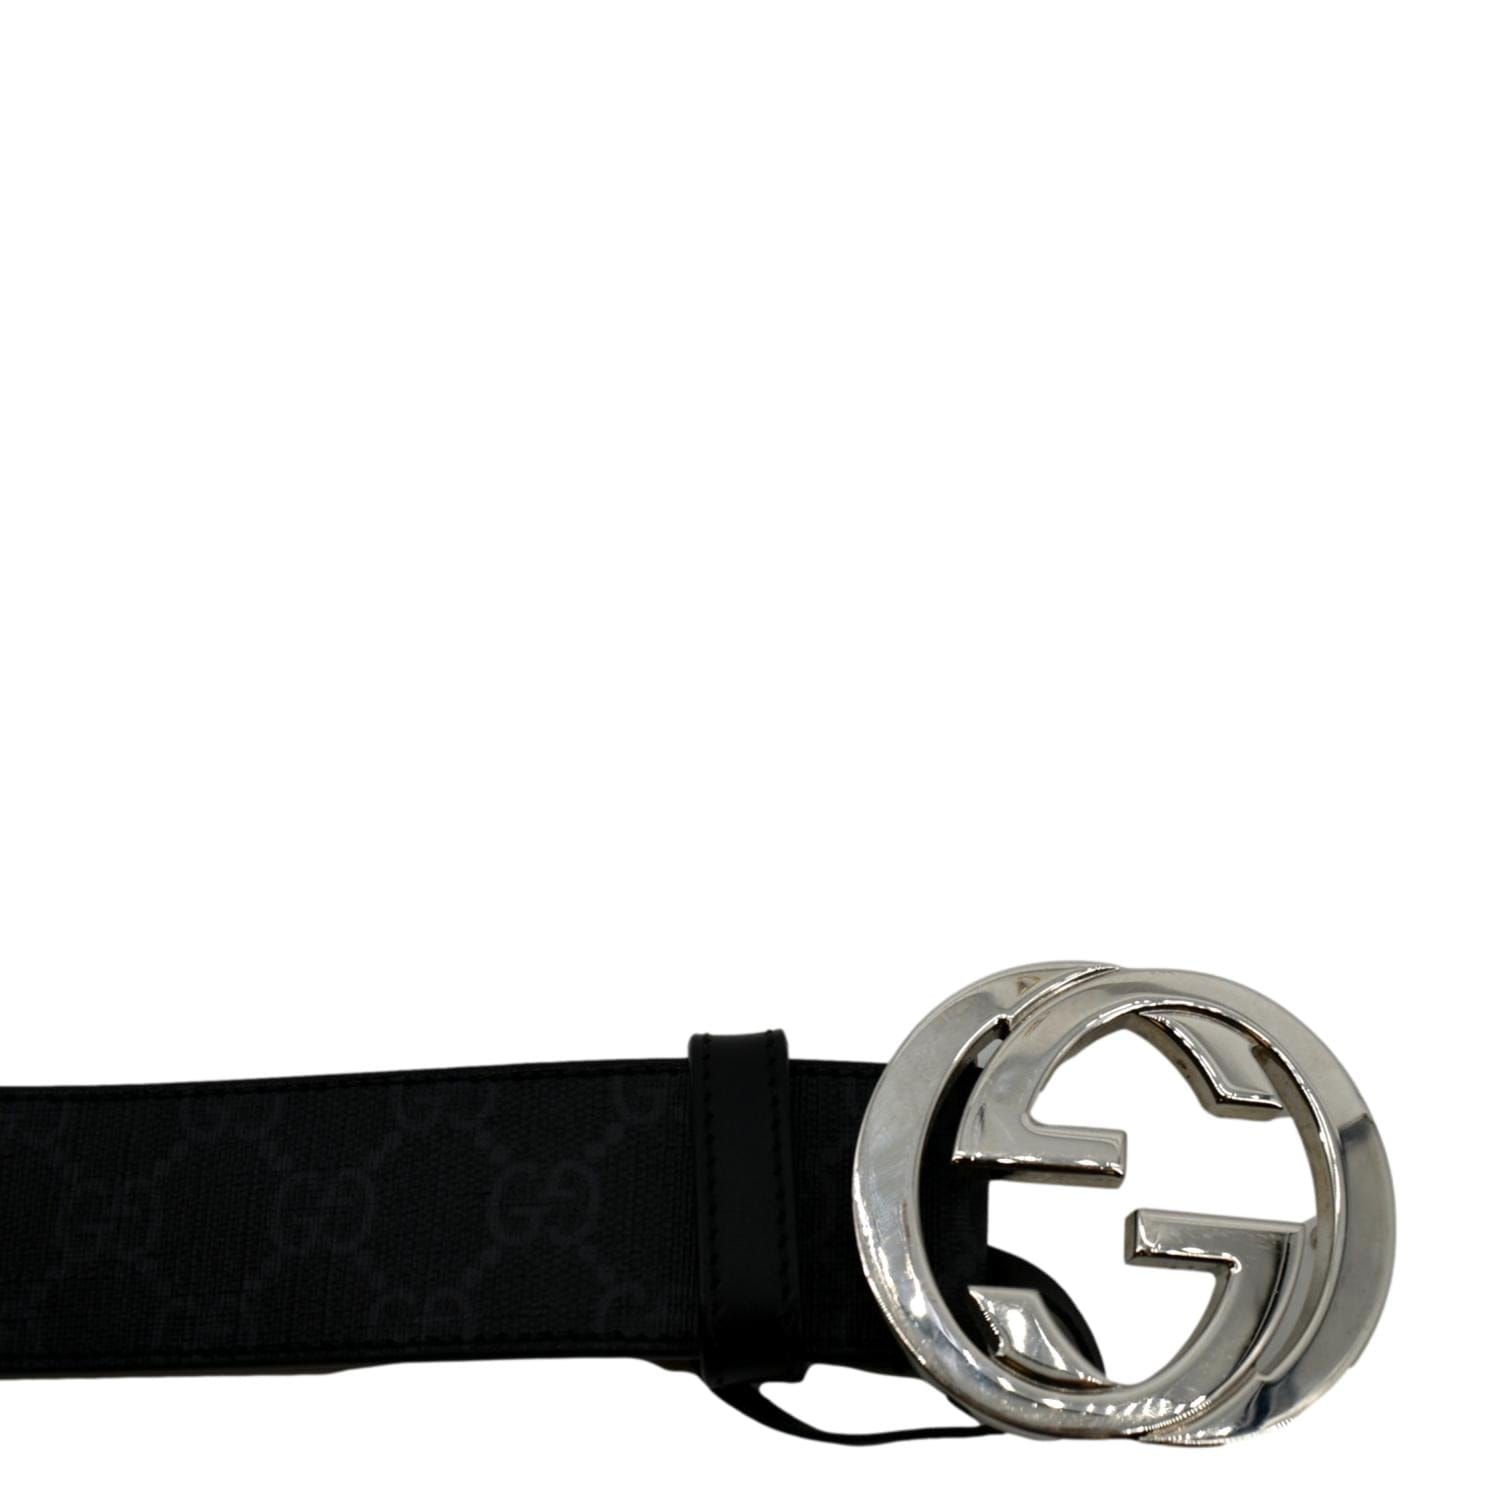 Gucci GG Canavs Interlocking G with Square Buckle Belt Size 42